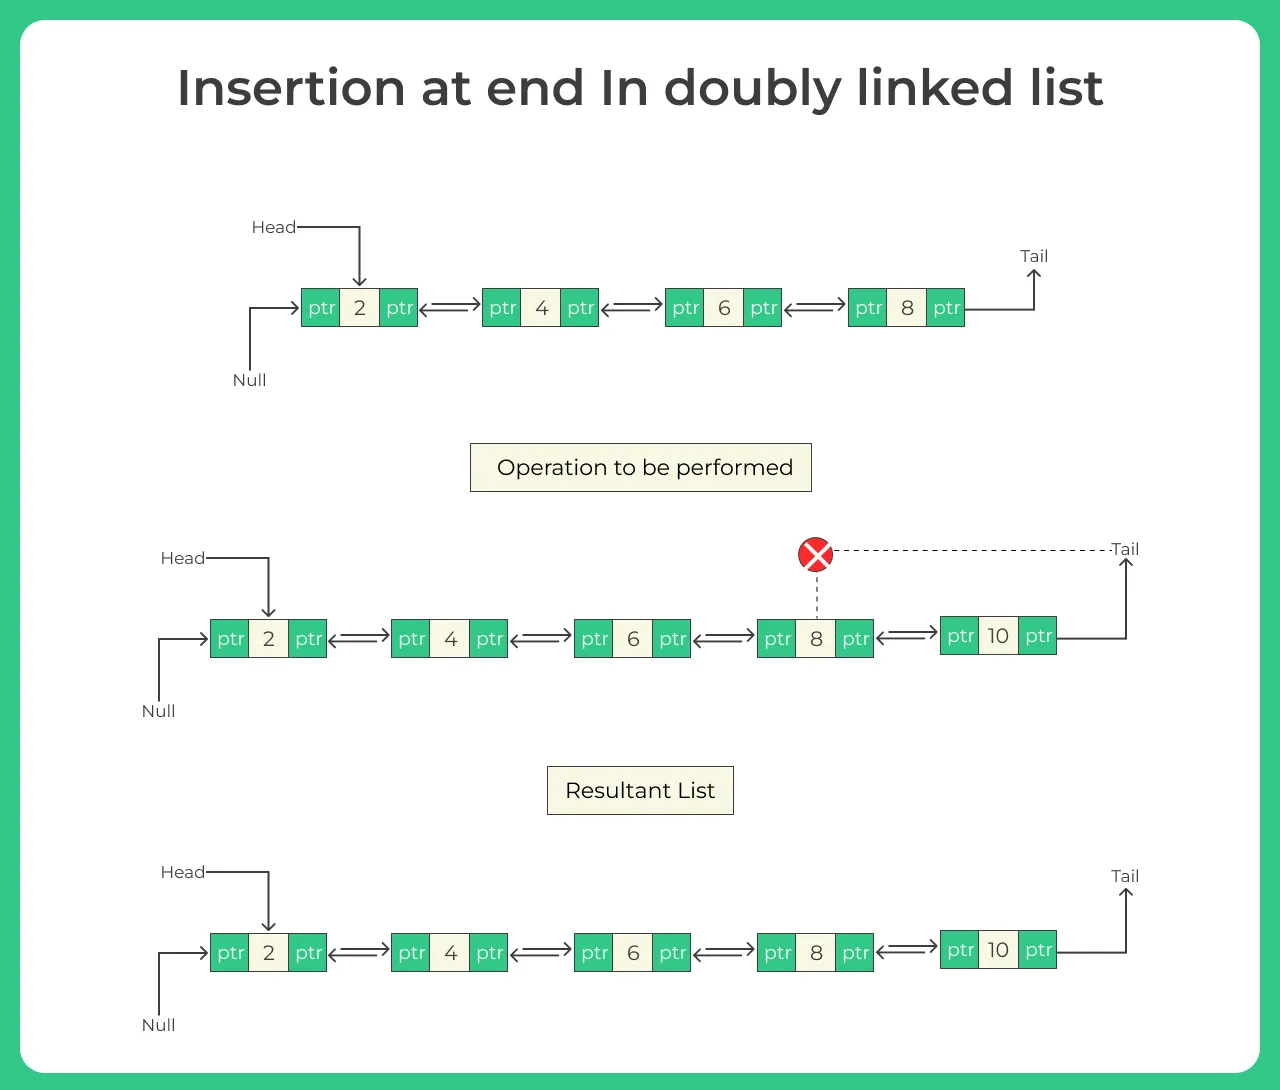 Insertion at end in a doubly linked list